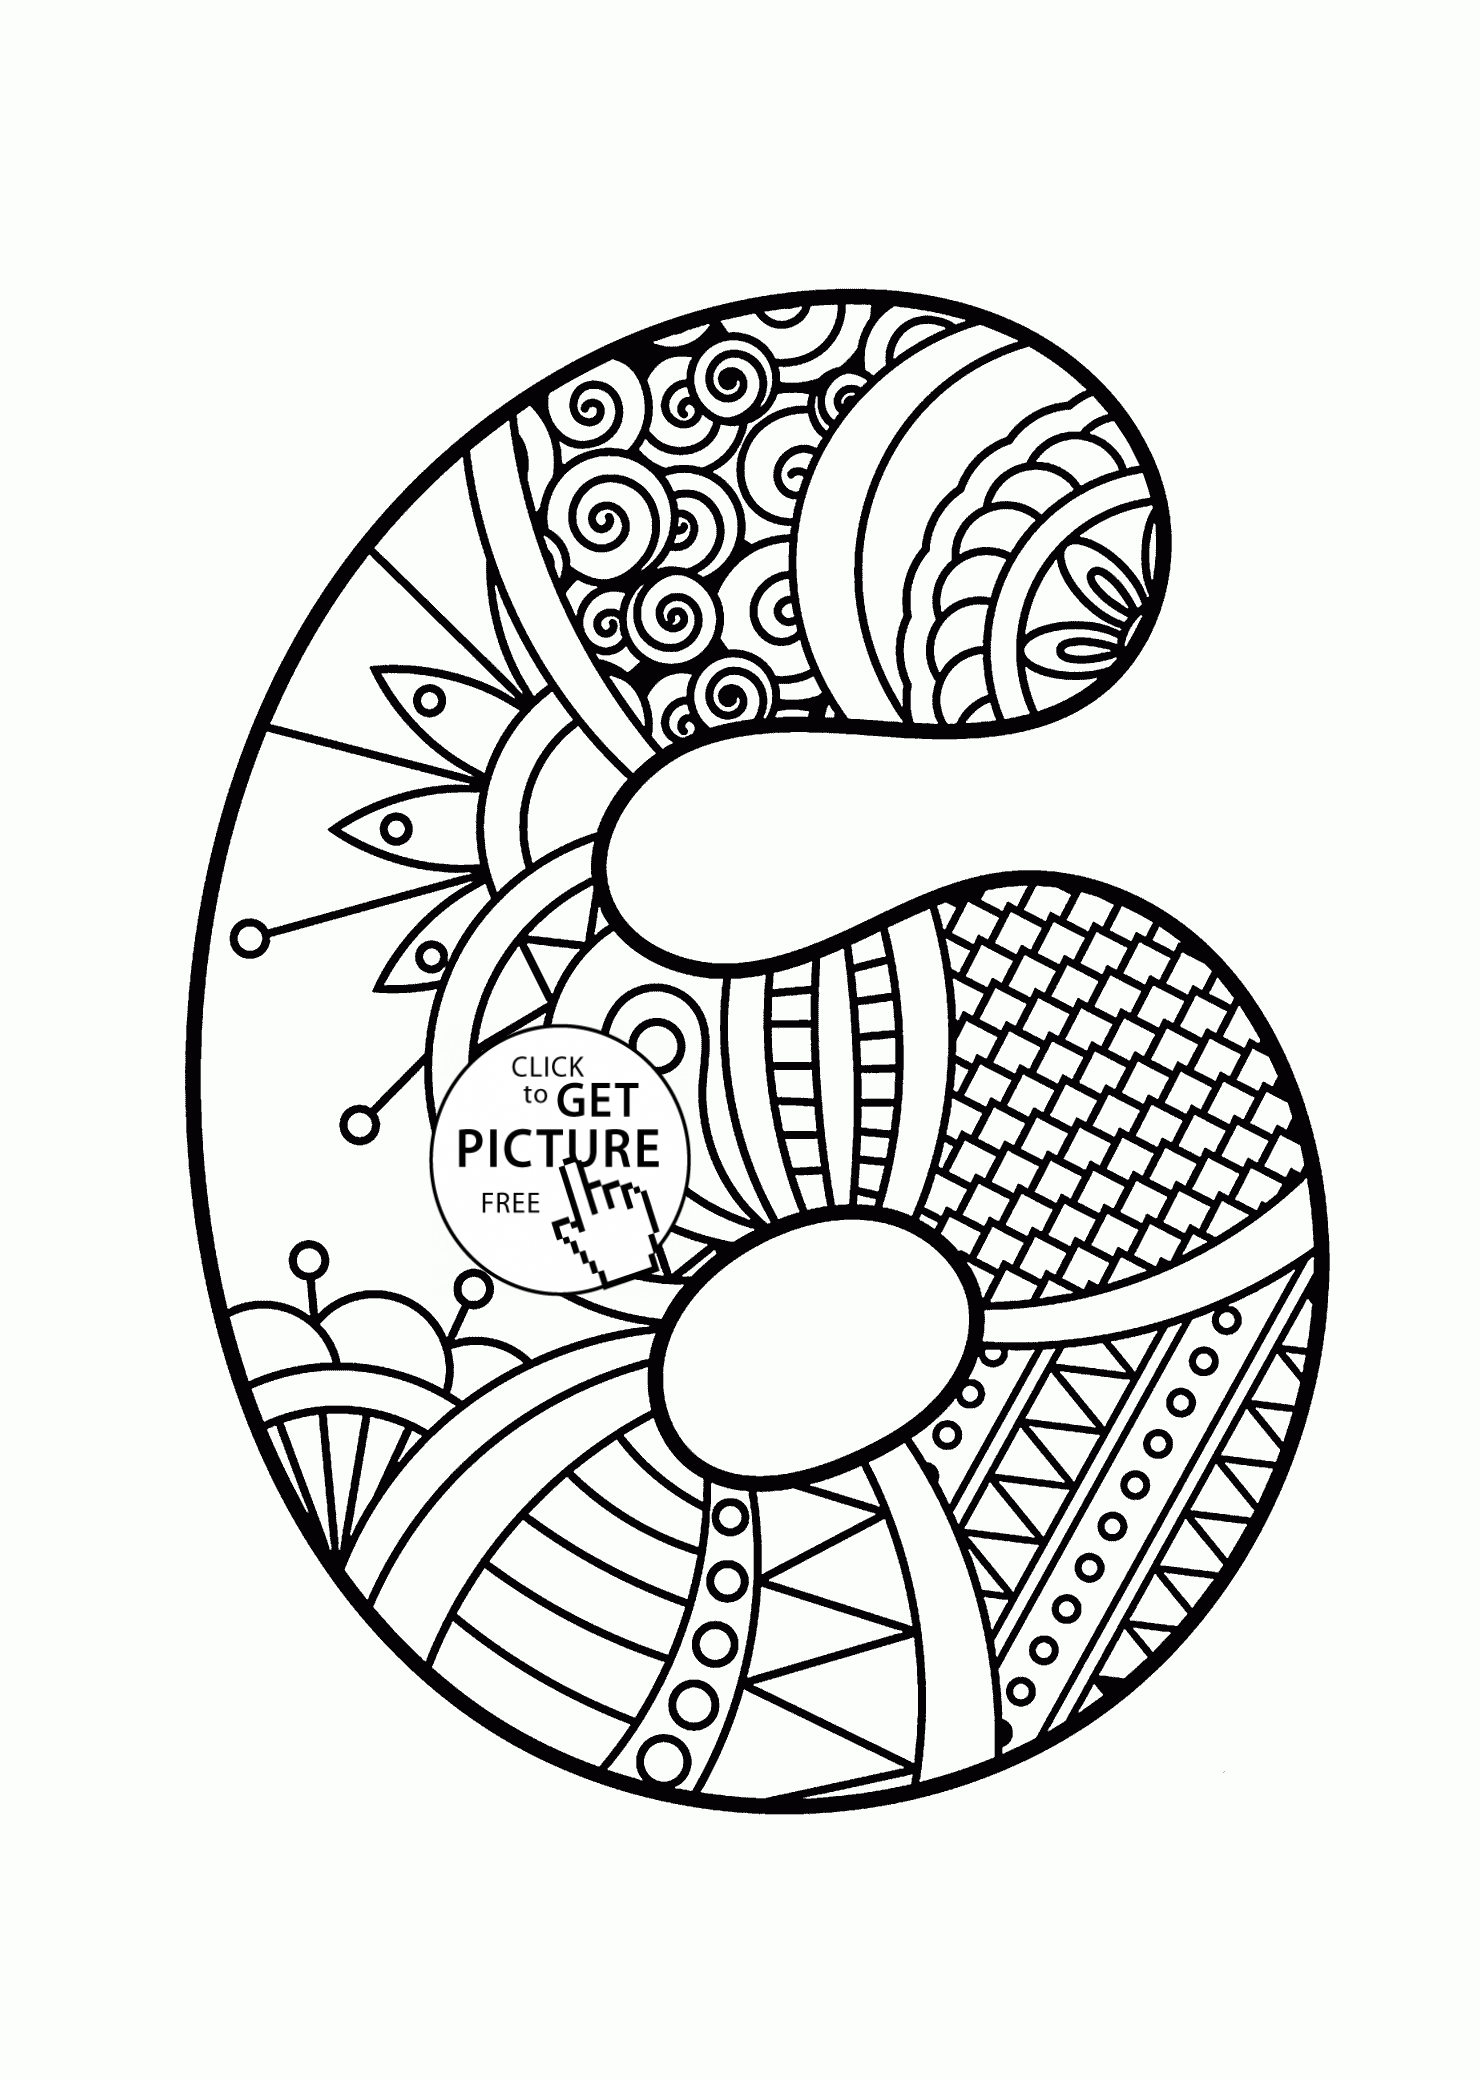 coloring page for 6 6 numbers coloring pages for kids printable free digits for page 6 coloring 